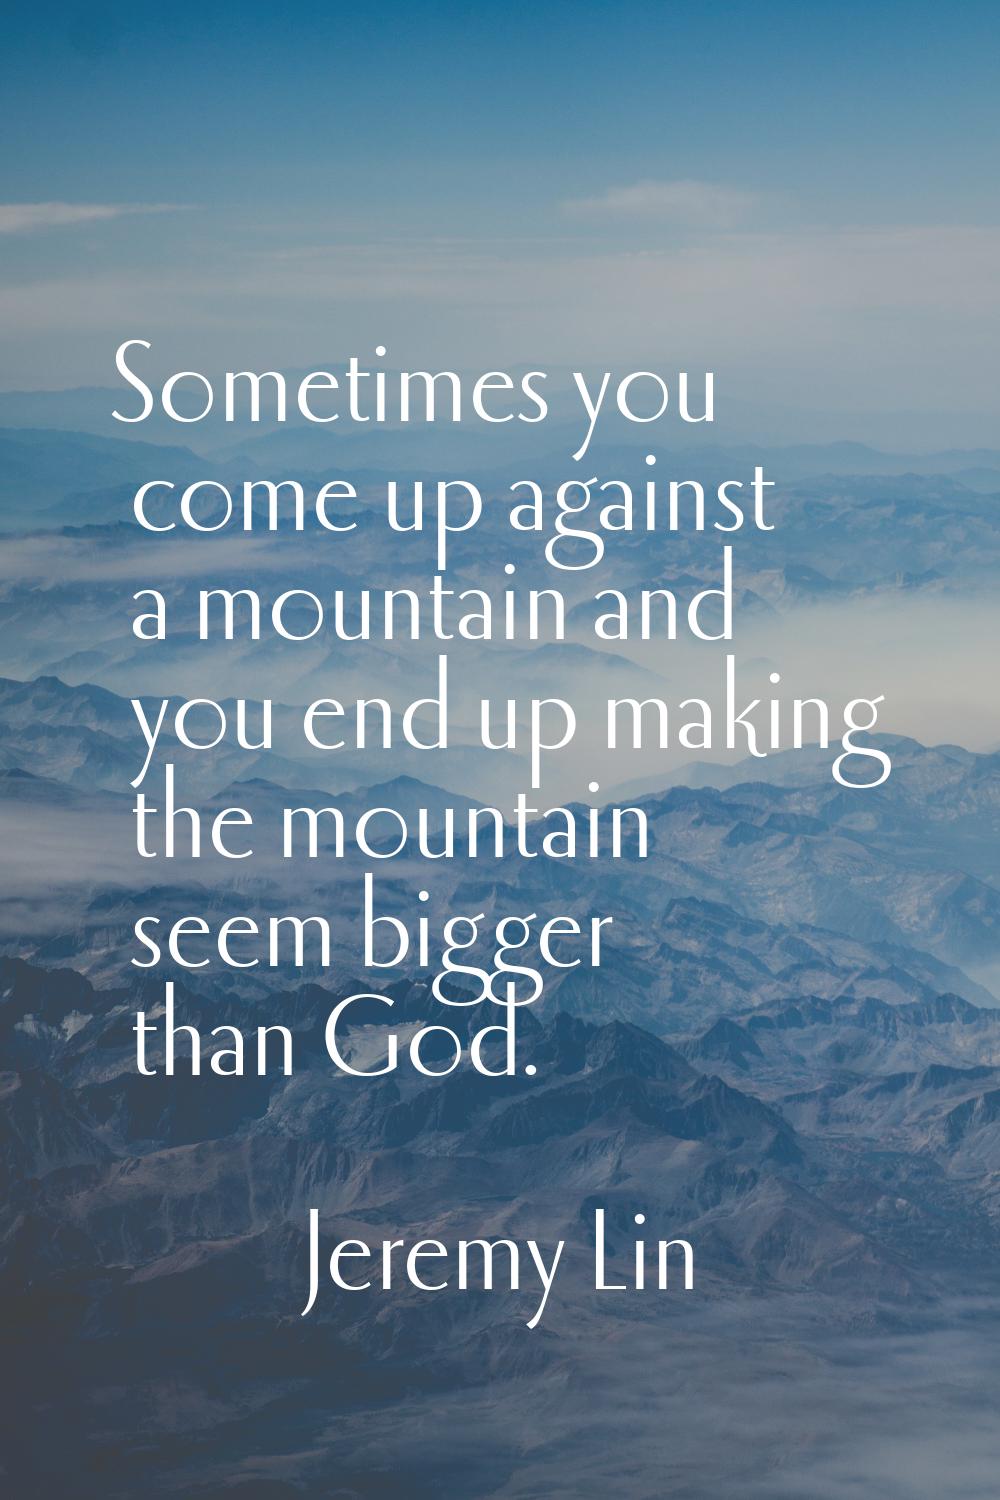 Sometimes you come up against a mountain and you end up making the mountain seem bigger than God.